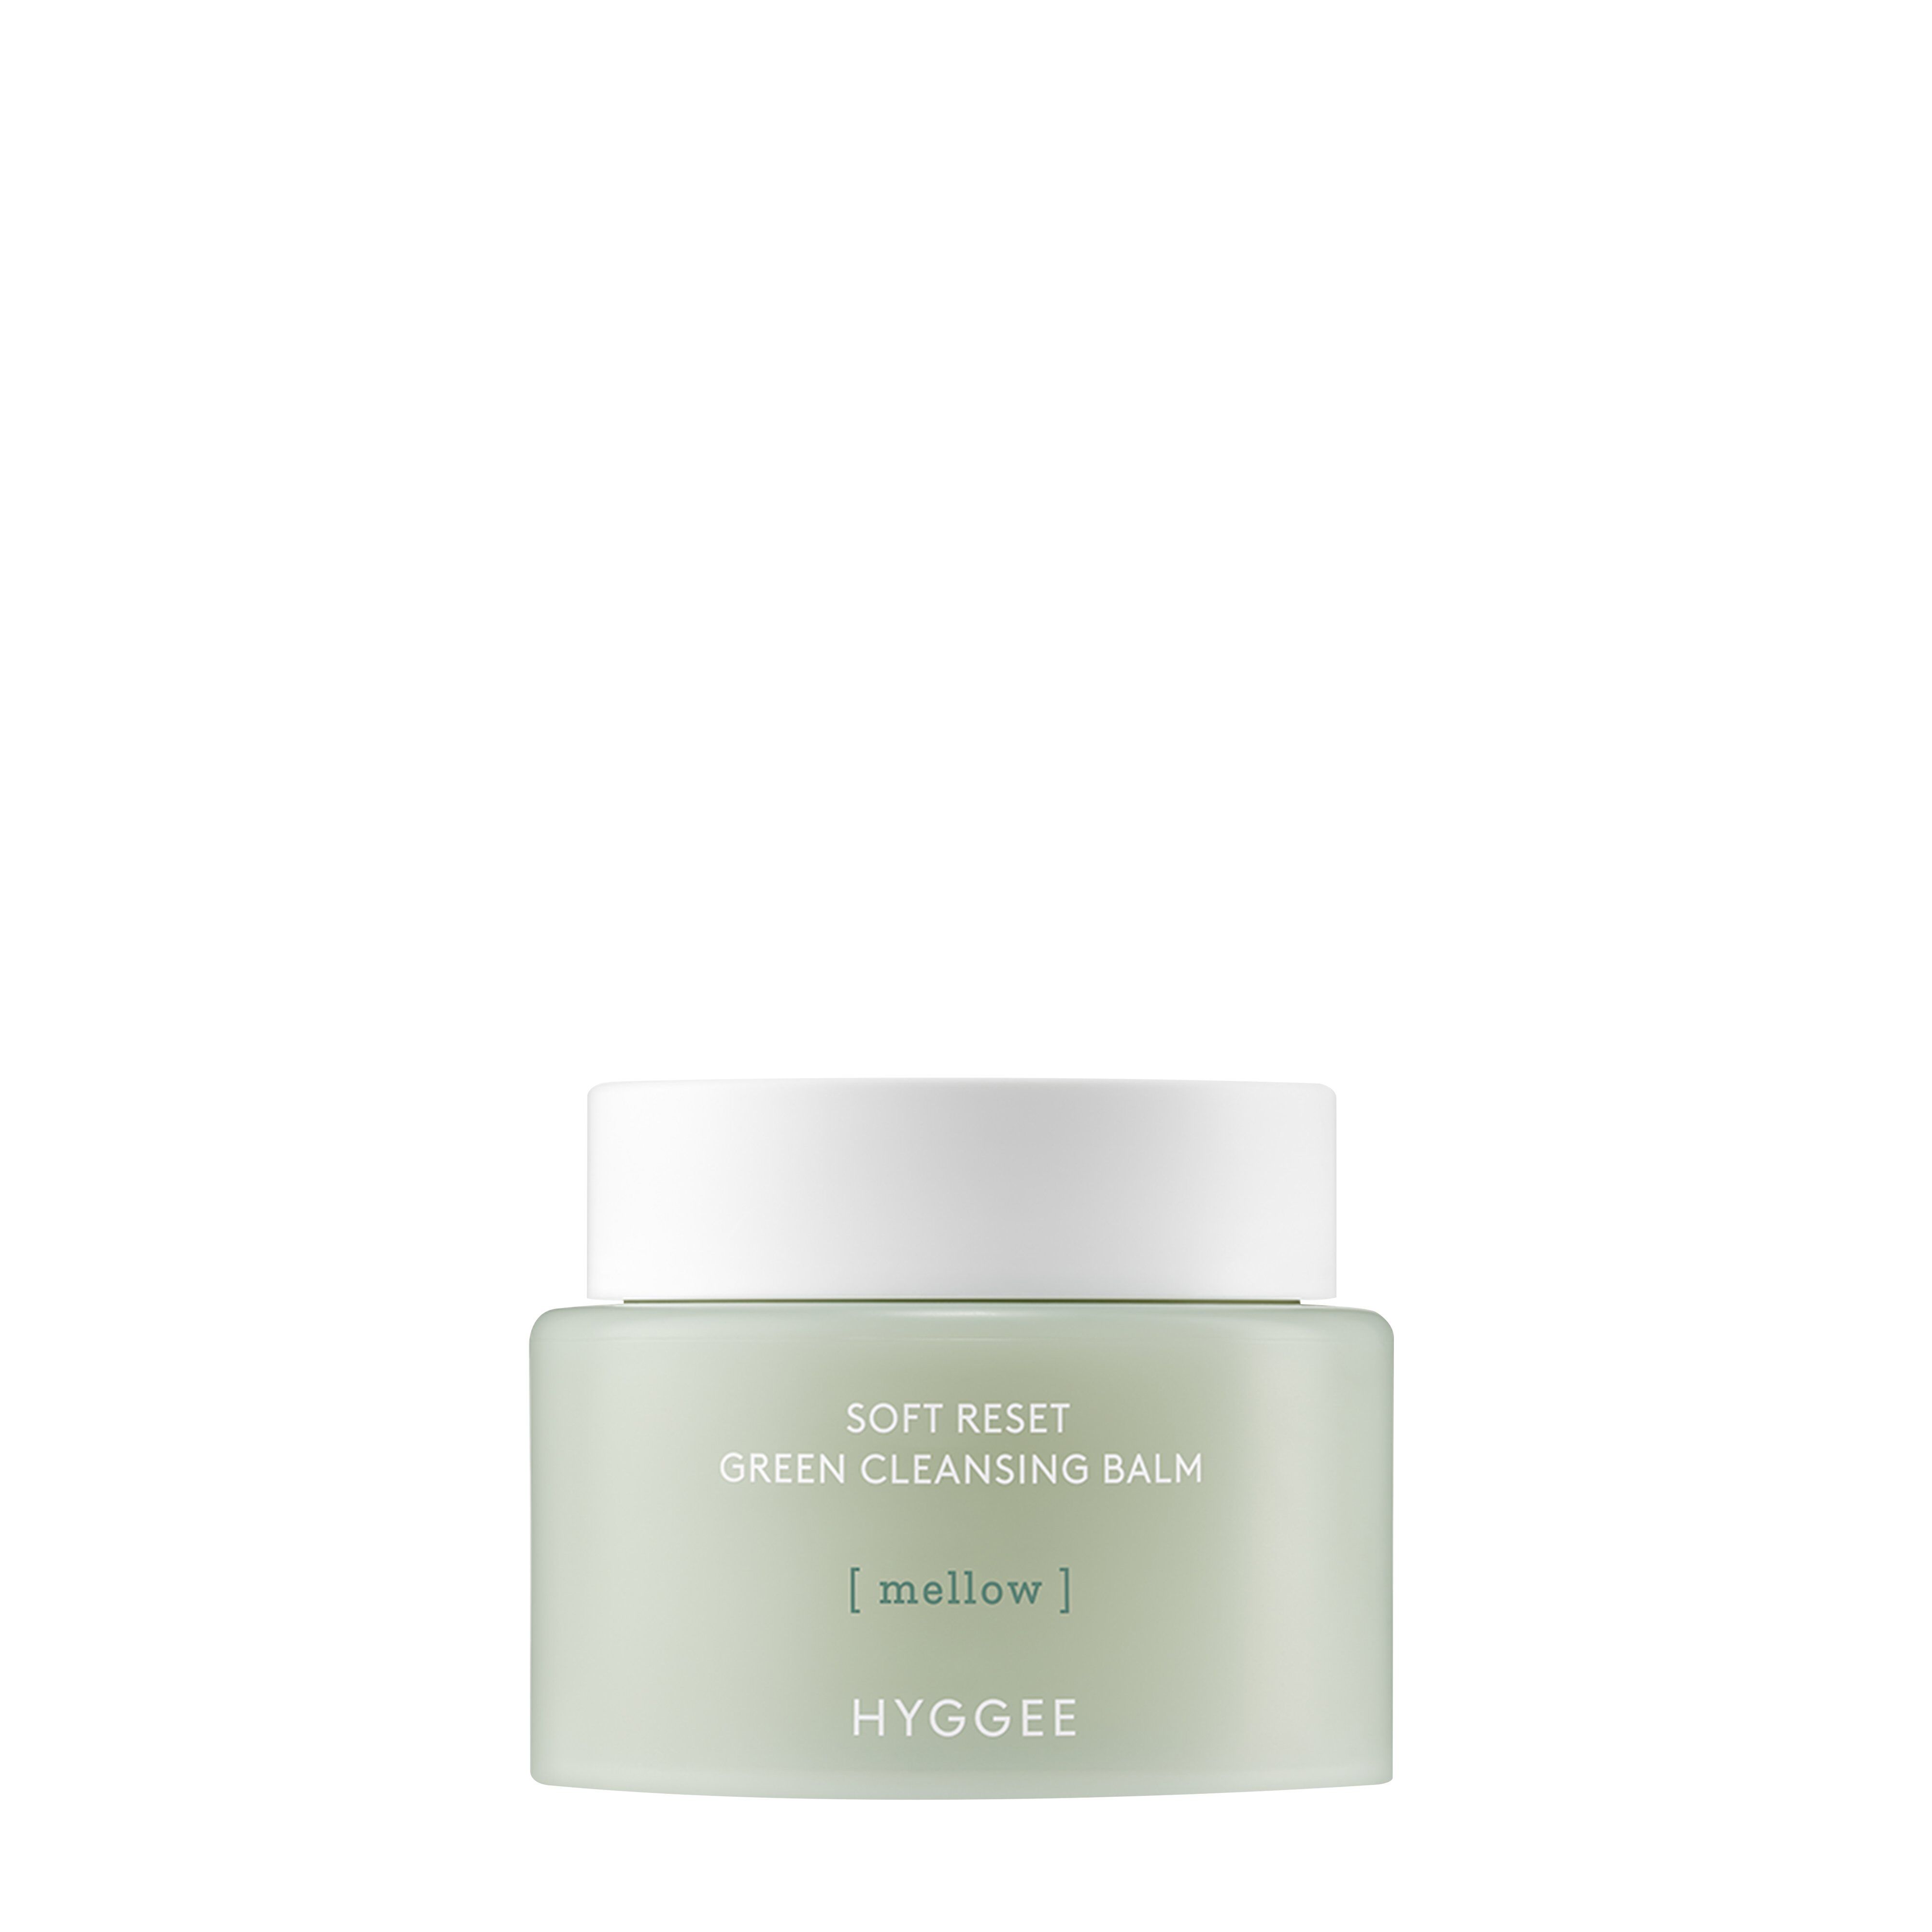 HYGGEE - Soft Reset Green Cleansing Balm